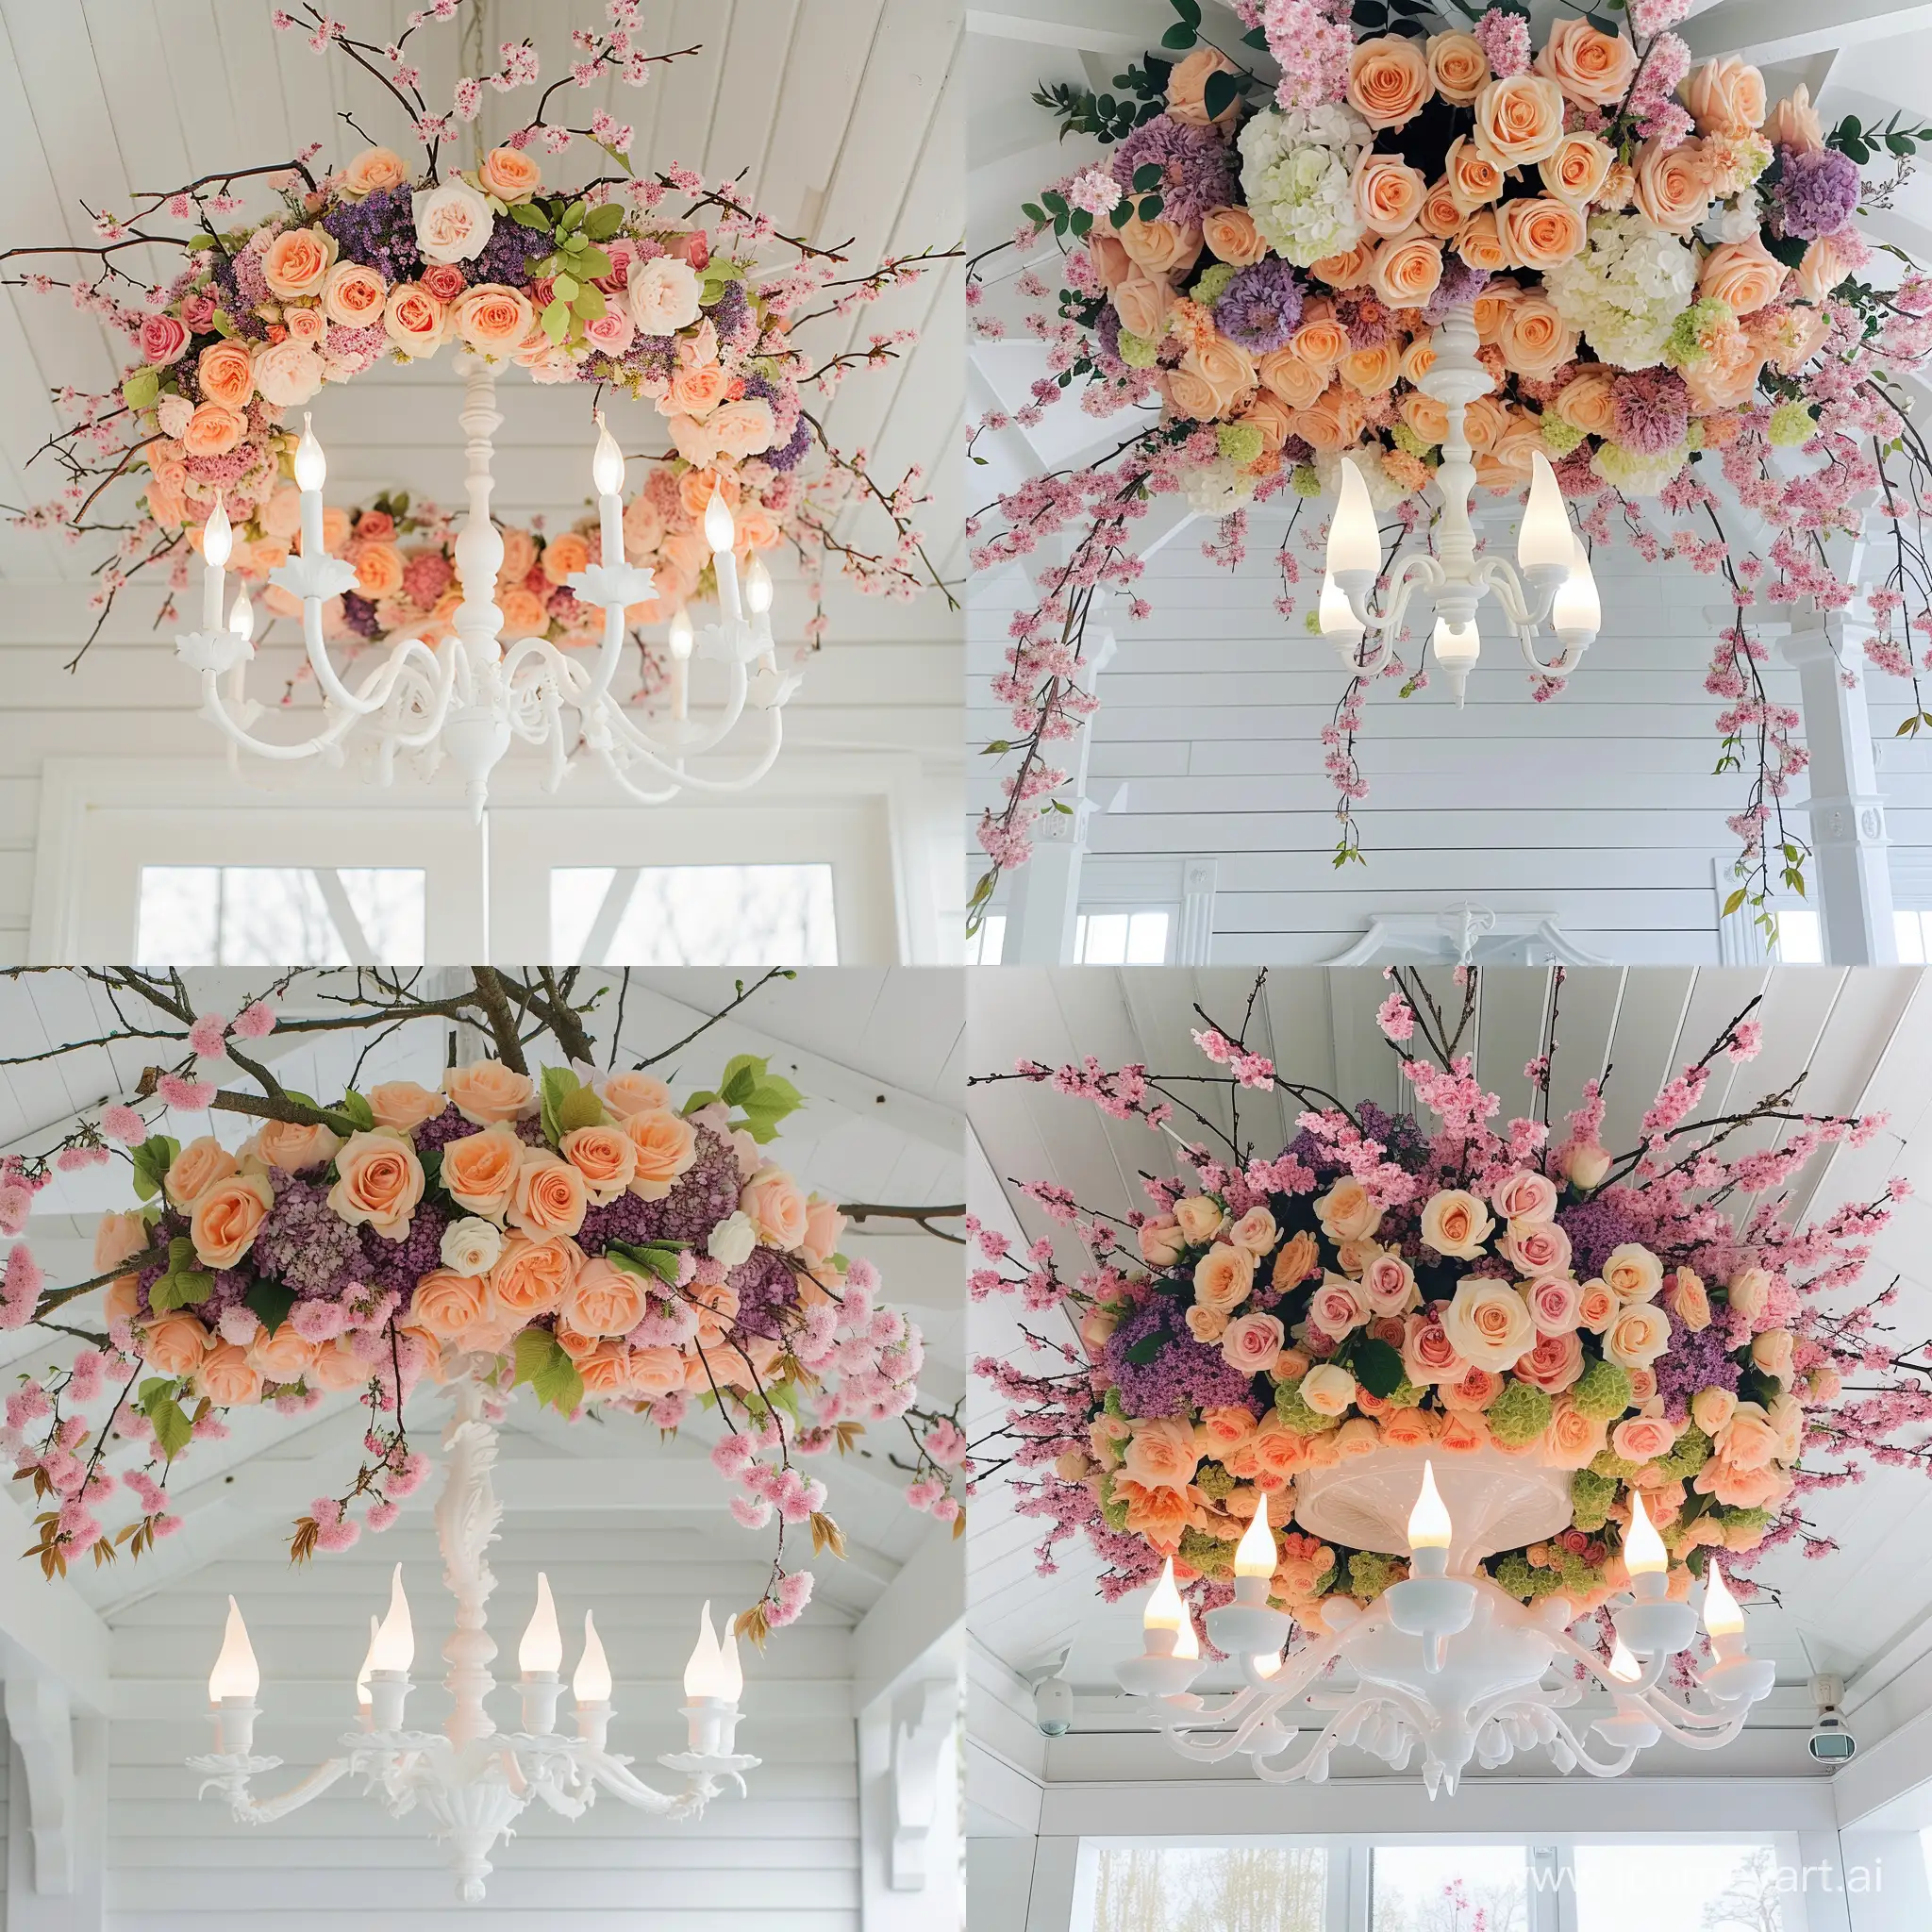 Show a white chandelier. above the chandelier are a thick layer of and LOTS of fresh flower in a circle. The flowers include peach colored garden roses, pink david austin roses, purple hydrangeas, and branching out are pink cherry blossoms twigs covered in blossoms. The chandelier has white flame shaped bulbs that are on and the room is very bright and airy. You DO NOT see the floor in this image. In this region please ADD LOTS of pink Cherry blossoms to these branches the branches are covered with pink blossoms and a few lime green leaves! place it hanging from the ceiling on a white wooden porch on a quaint white cottage, in flat style